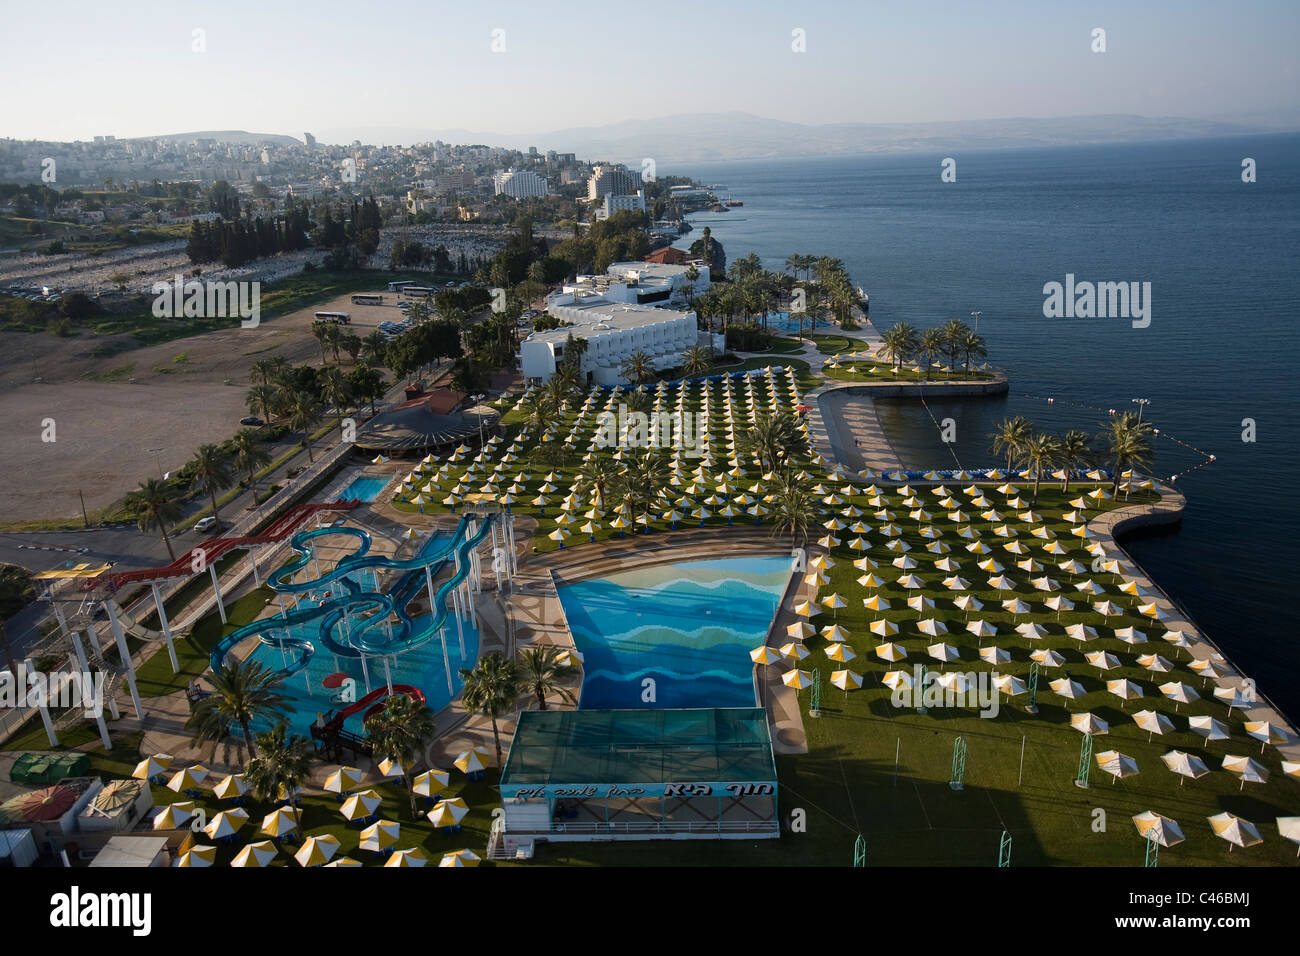 Aerial photograph of the Ron Hotel in the Sea of Galilee Stock Photo